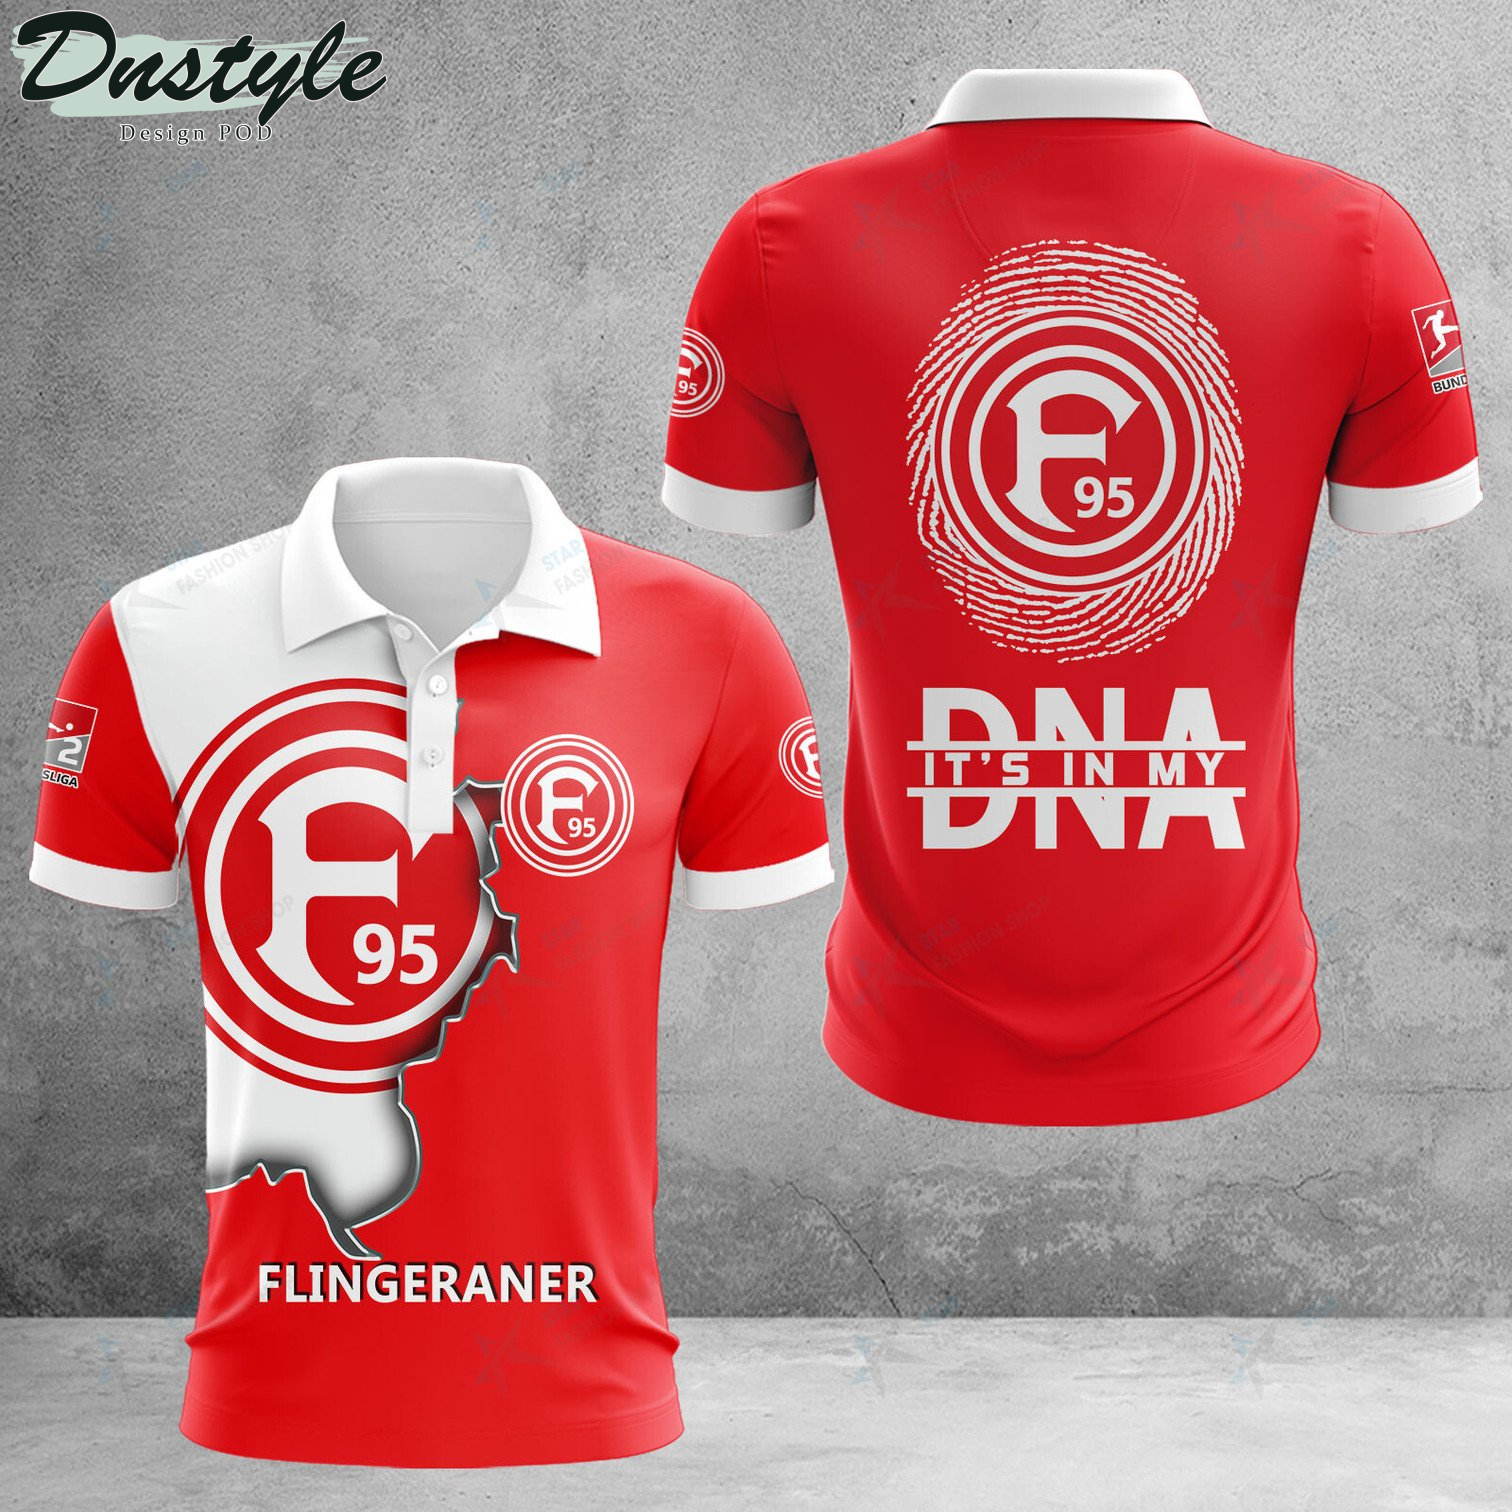 Fortuna Dusseldorf it's in my DNA polo shirt